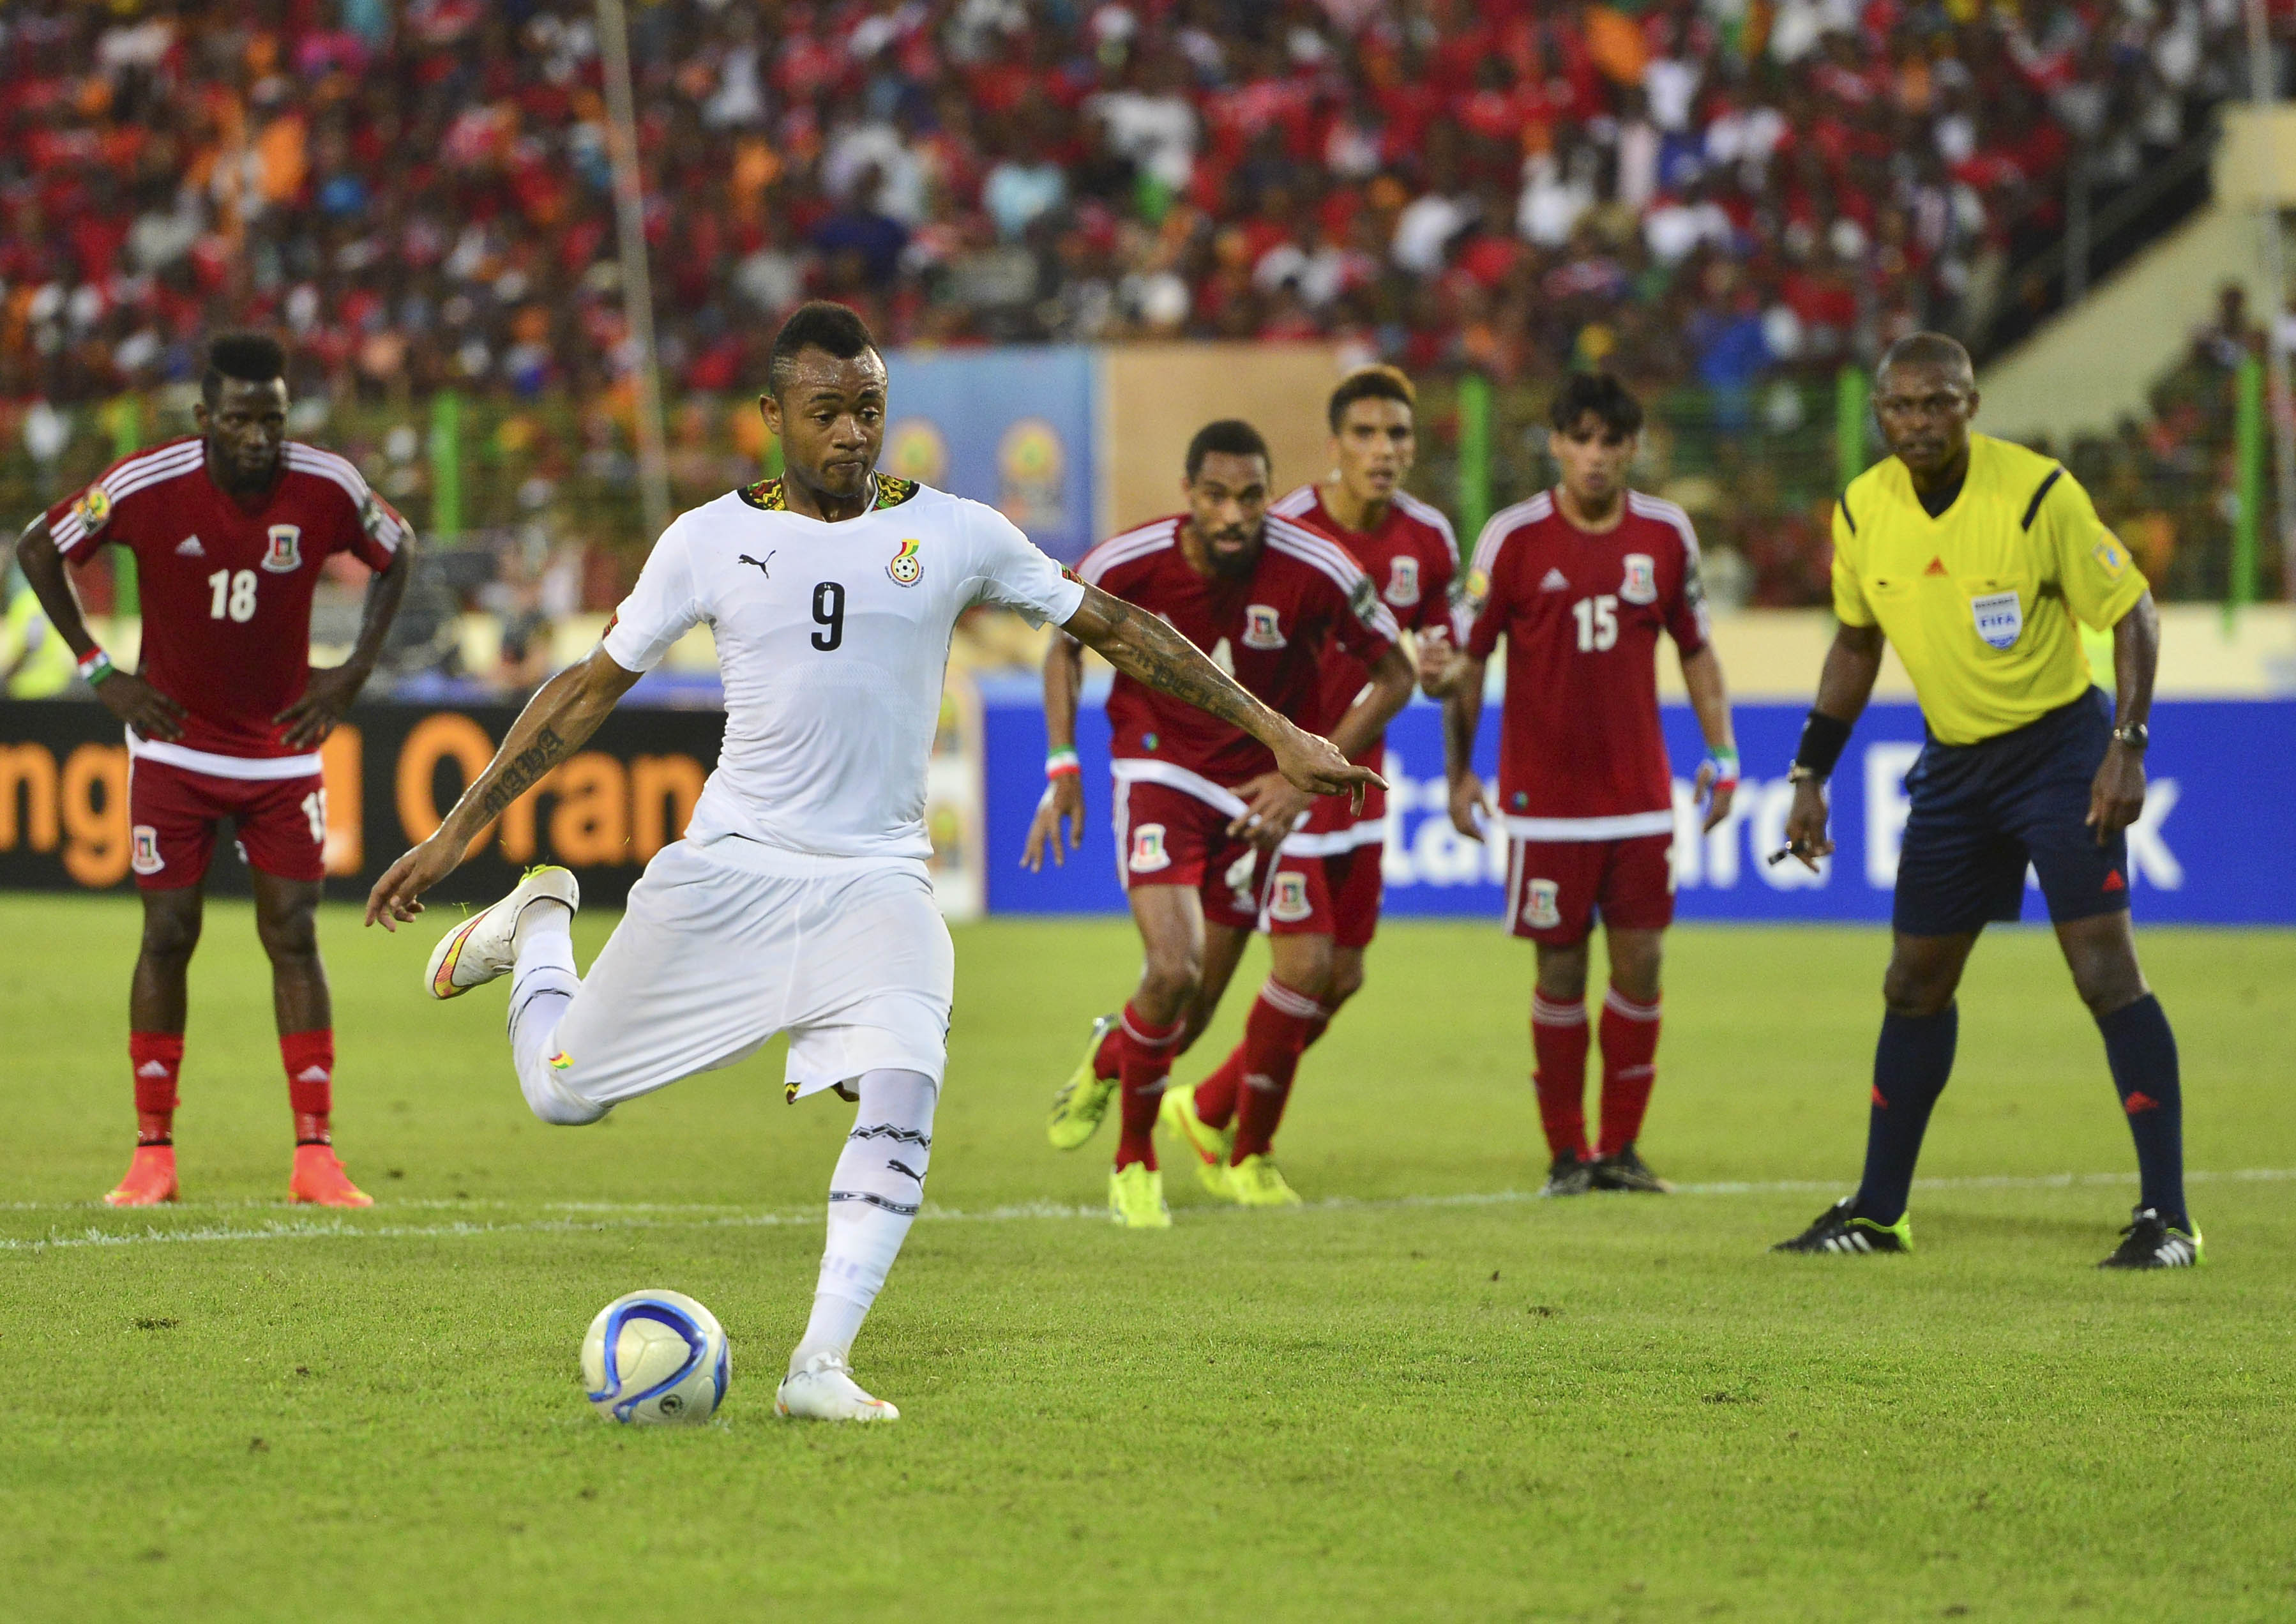 epa04605231 Jordan Ayew of Ghana scores a penalty during the 2015 Africa Cup of Nations semi final match between Ghana and Equatorial Guinea at the Malabo Stadium, Malabo, Equatorial Guinea on 05 February 2015.  EPA/BARRY ALDWORTH UK AND IRELAND OUT